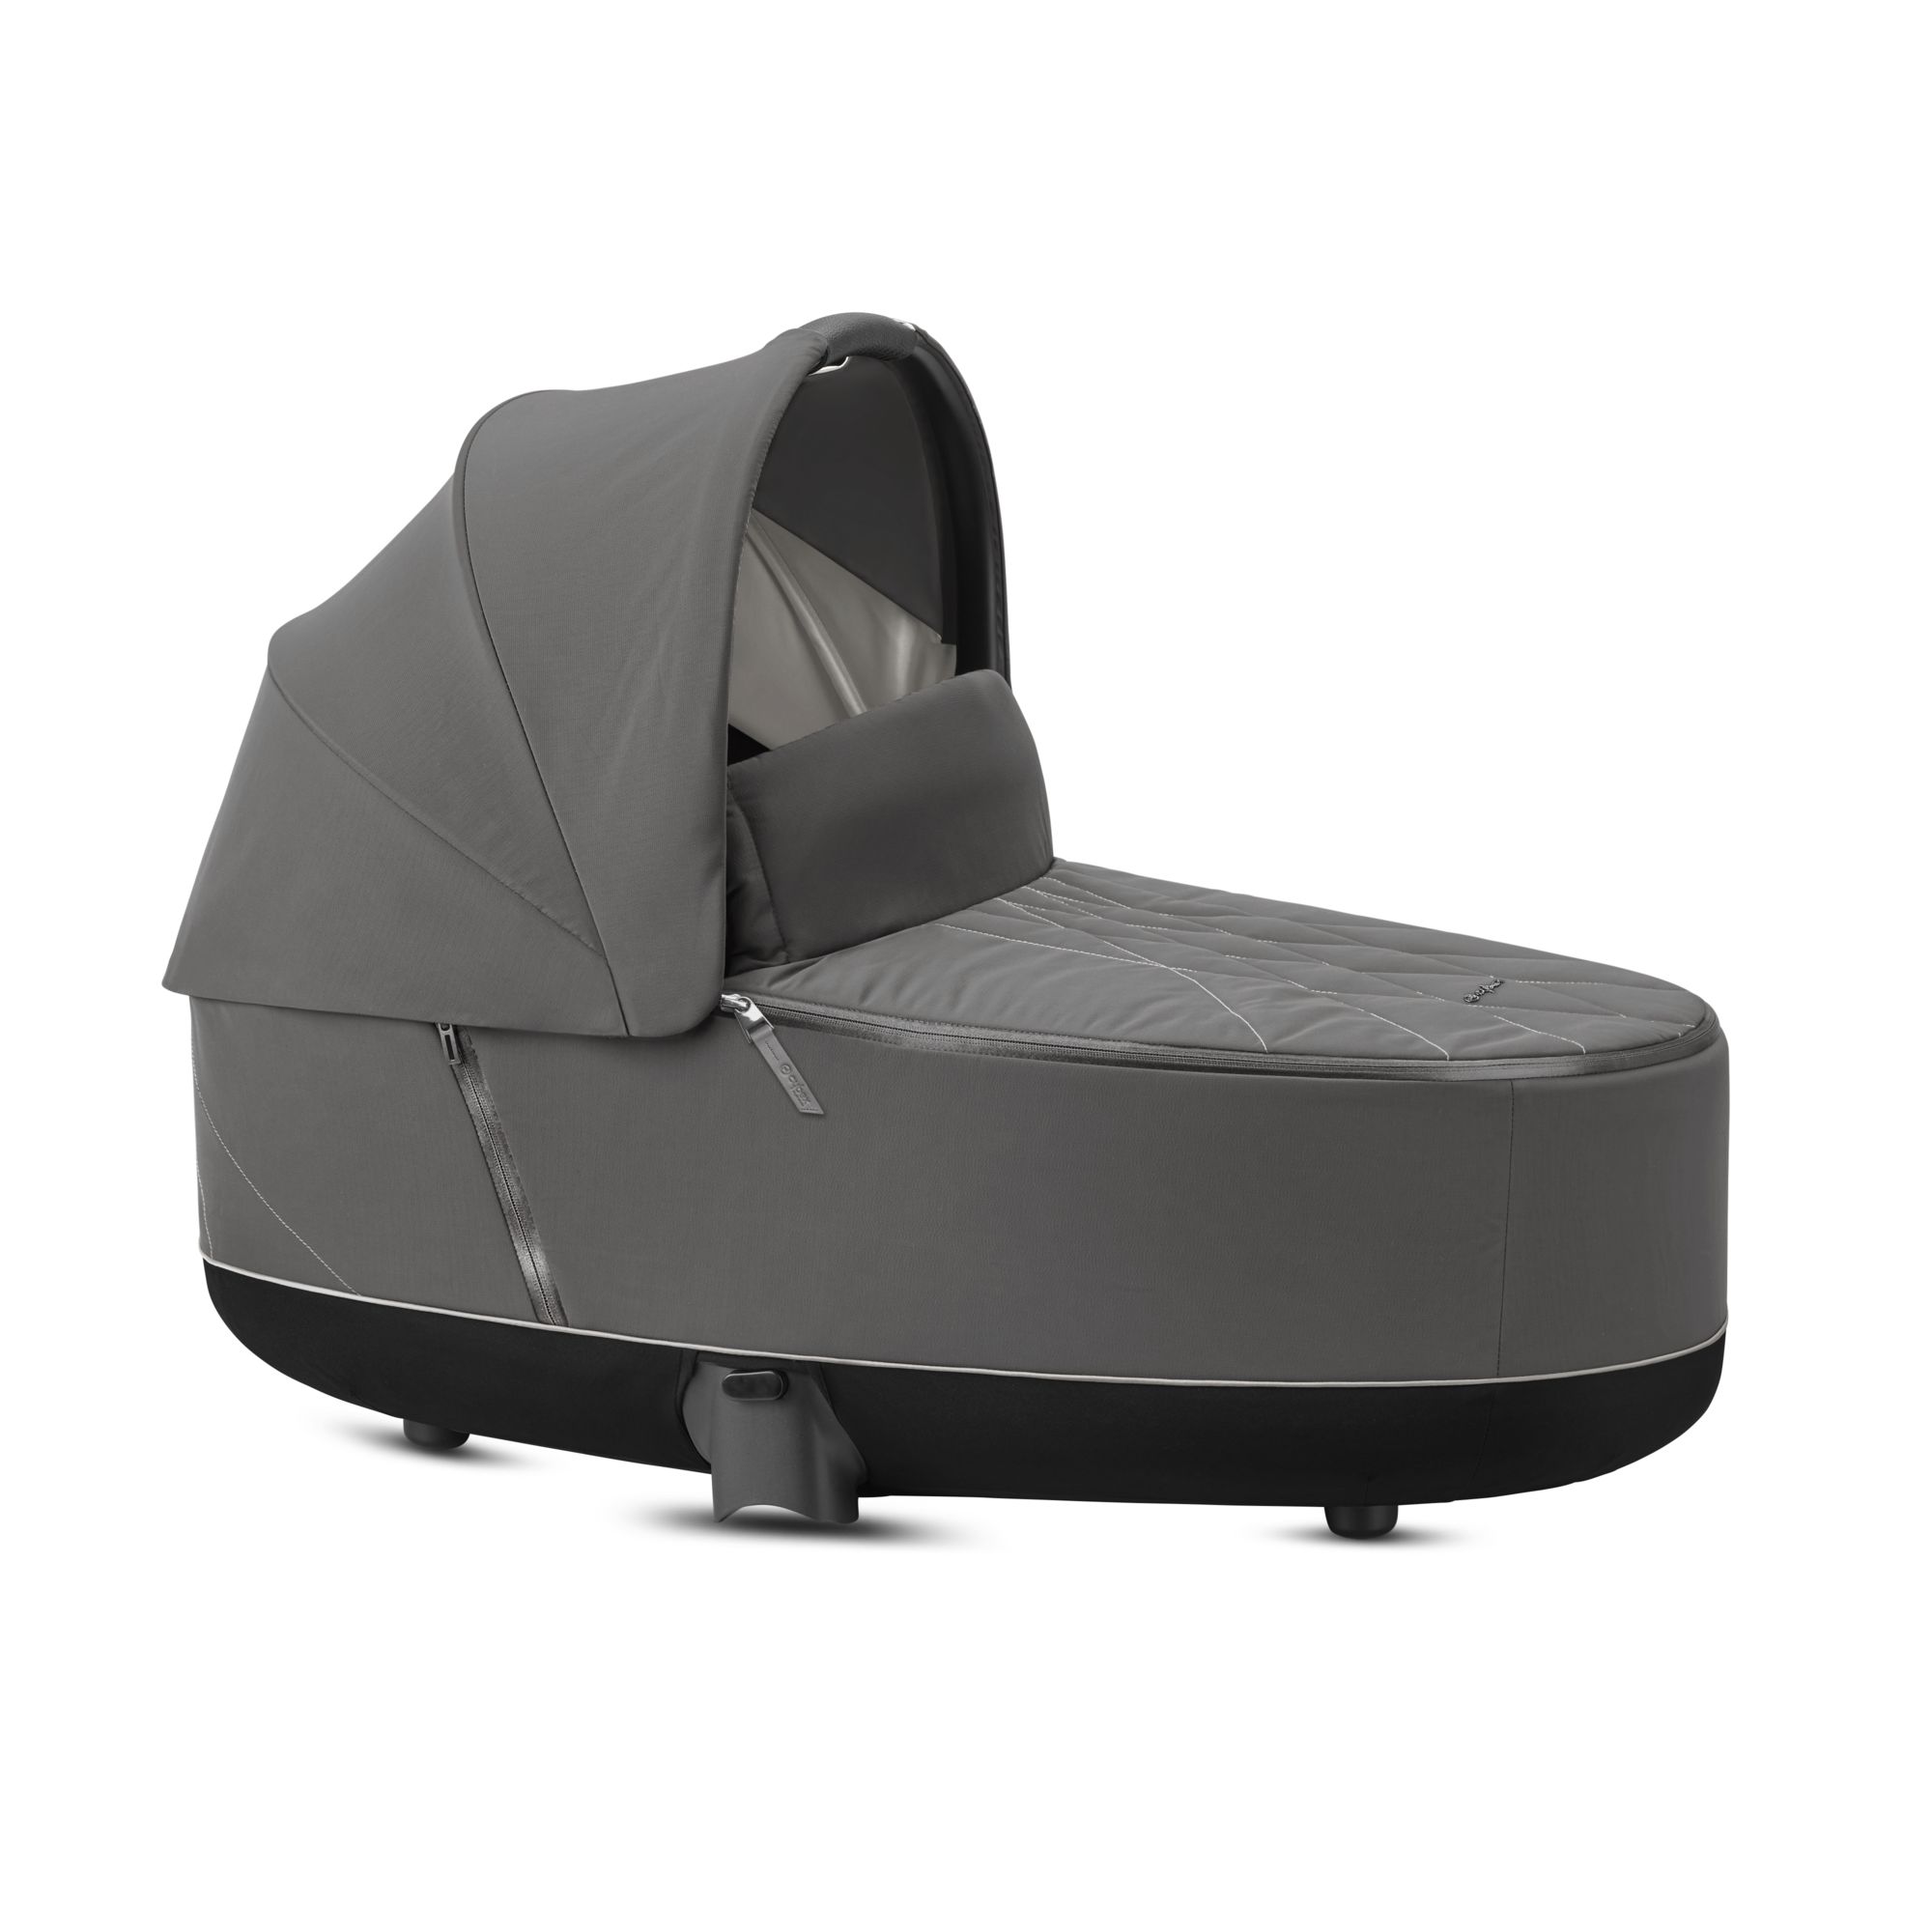 Cybex Priam Carry Cot Lux